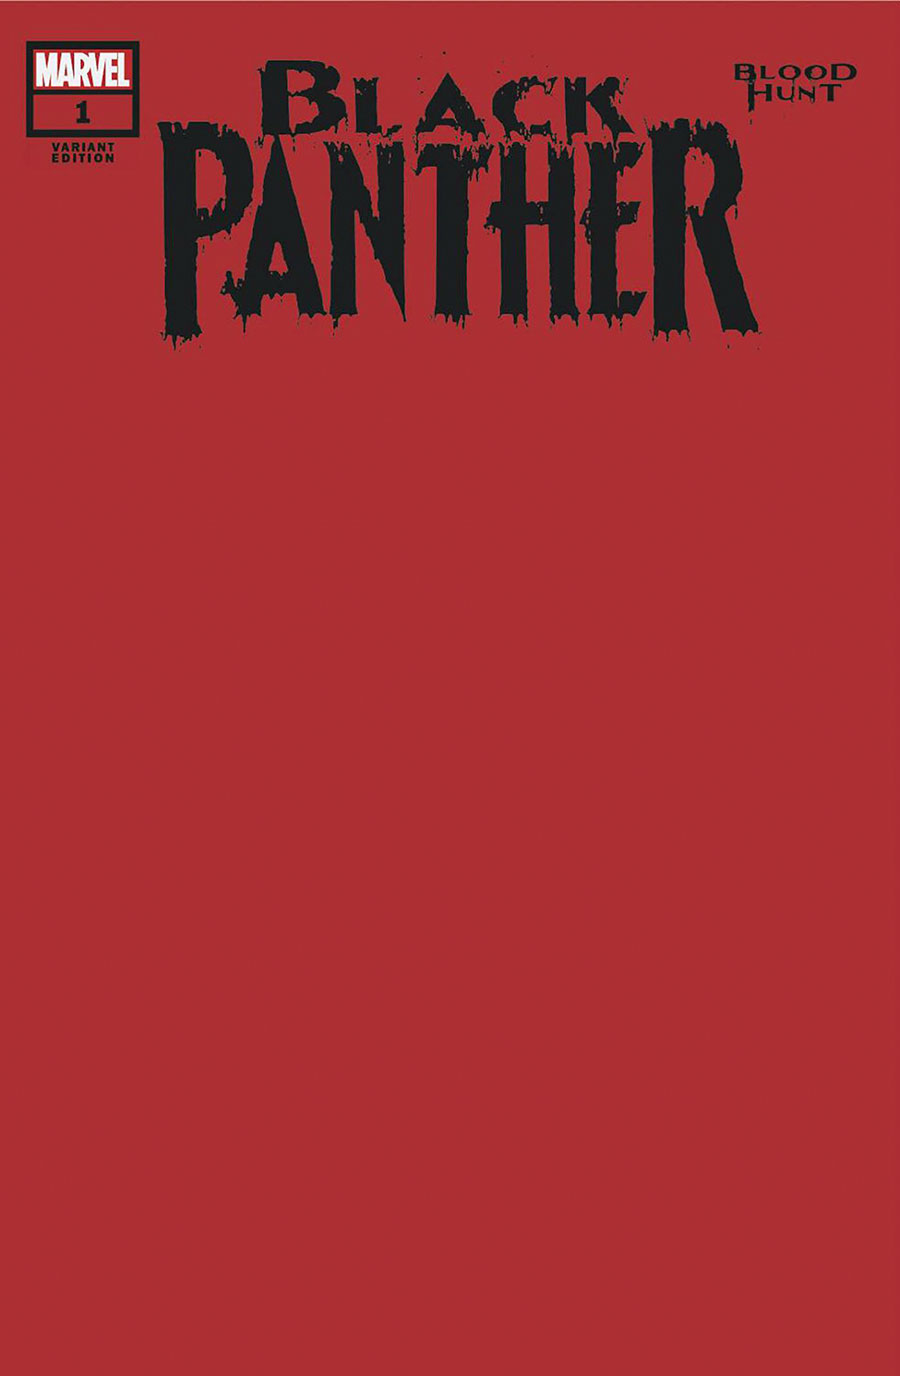 Black Panther Blood Hunt #1 Cover B Variant Blood Red Blank Cover